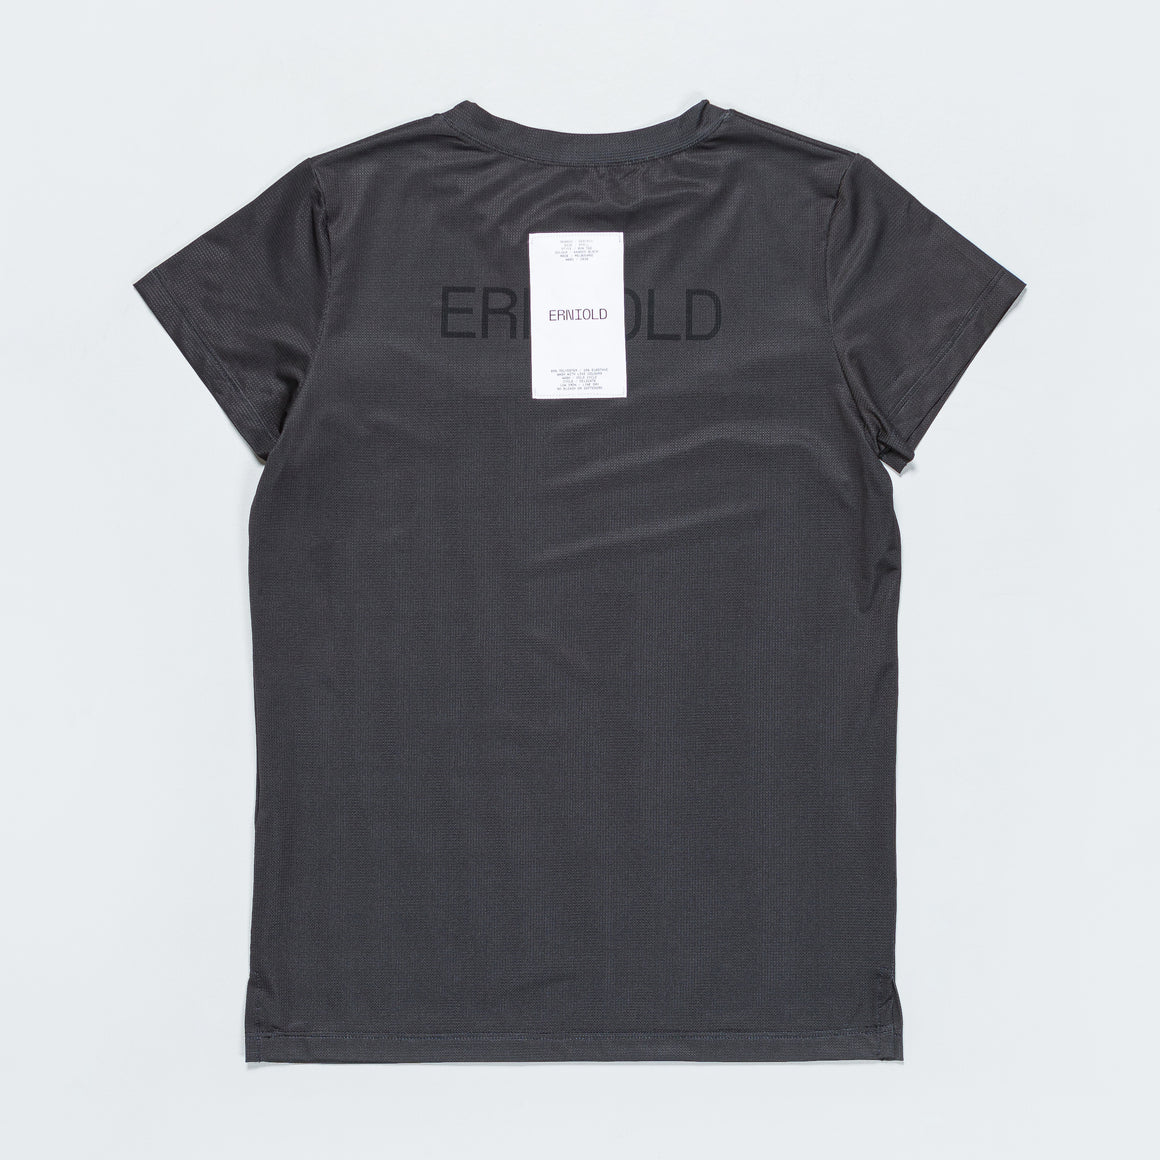 Erniold - Womens Run Tee - W. Black - Up There Athletics